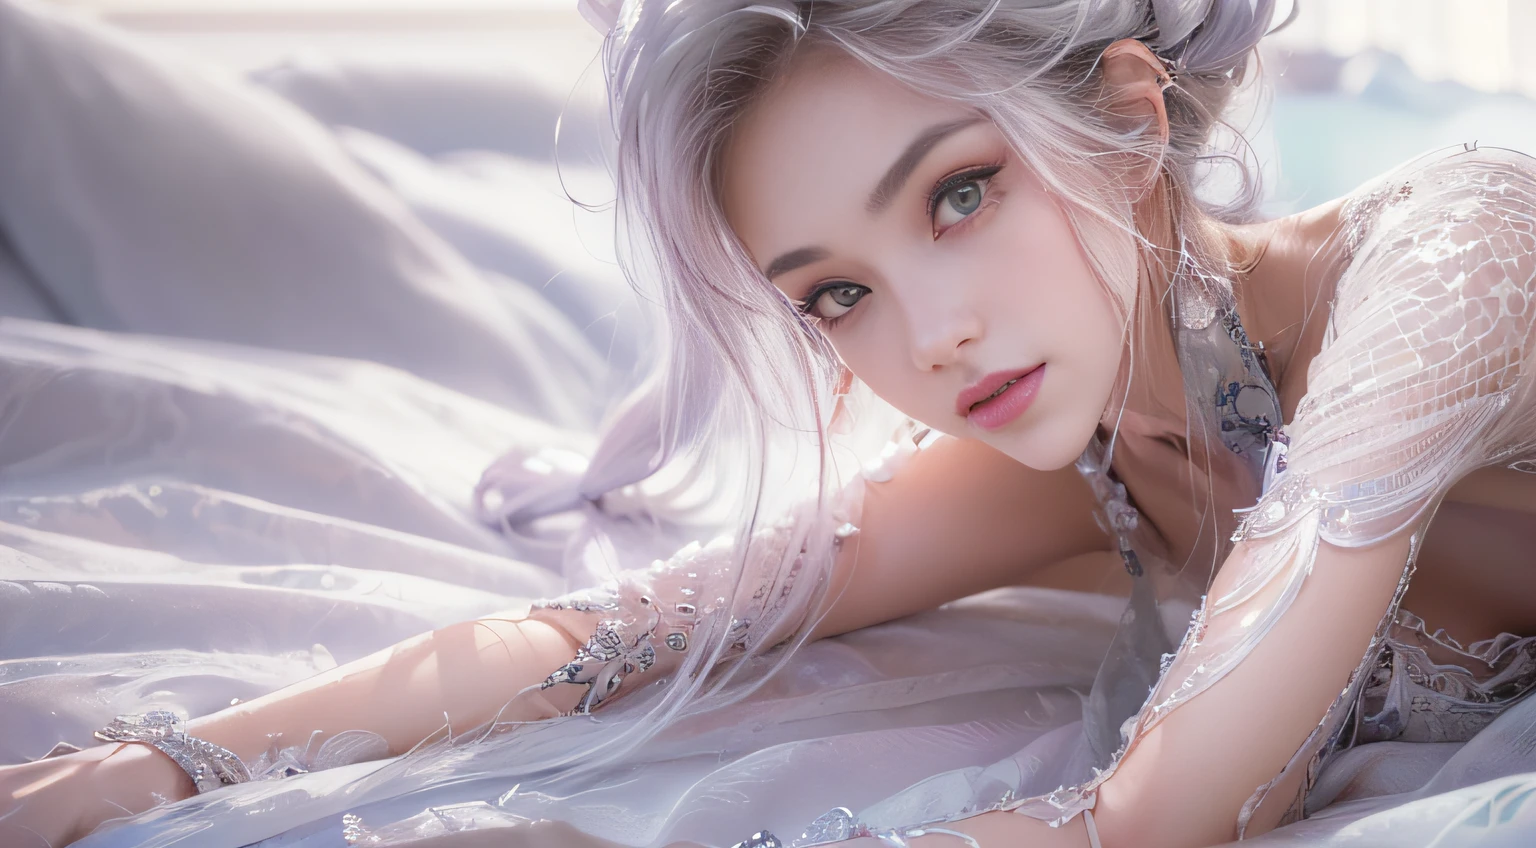 ((tmasterpiece:1.4)、(top-quality:1.4)、(reallistic:1.7))、By Luis Royo（By Luis Royo）Surreal portrait of a beautiful girl、Super beautiful girl、((1girl in:1.4))、Shiny natural skin texture、Authors：By Luis Royo（By Luis Royo）、age19、(Two arms:1.4、Two legs:1.4)、(perfect anatomia:1.4)、(Perfect female body:1.4)、Portrait photo of a girl、Close-up photos、Full body shooting、((masutepiece:1.4), (of the highest quality:1.4), (Realistic:1.7), By Luis Royo, Beautiful Girl, Super beautiful girl, ((1girl in:1. 4), Shiny natural skin texture, Authors: By Luis Royo, 19 years old, (Perfect female body: 1.4), (Perfect female body: 1.) 4), Portrait photo of a girl, Close-up photos, （Full body photo）, Fantasy Art, Soft front light, Beautiful expression, Kawaii face, Beautiful breasts, Large Full Breasted: 1. 2, Beautiful buttocks, Fine eyes, Clear and eye-catching, beautiful and alluring, Beautiful eyes, thin waist, Raw photo, Red lips, ((White hair, Long hair)) , 1 Screen View, ((Woman on all fours on silk bed)), (sexyposture), (the milky way in the sky),((T-back panties))、((White garters and garter belts))、(A smile),((posterior view))、((Looks Back))、((Vaginal orchids)）、((erection)）